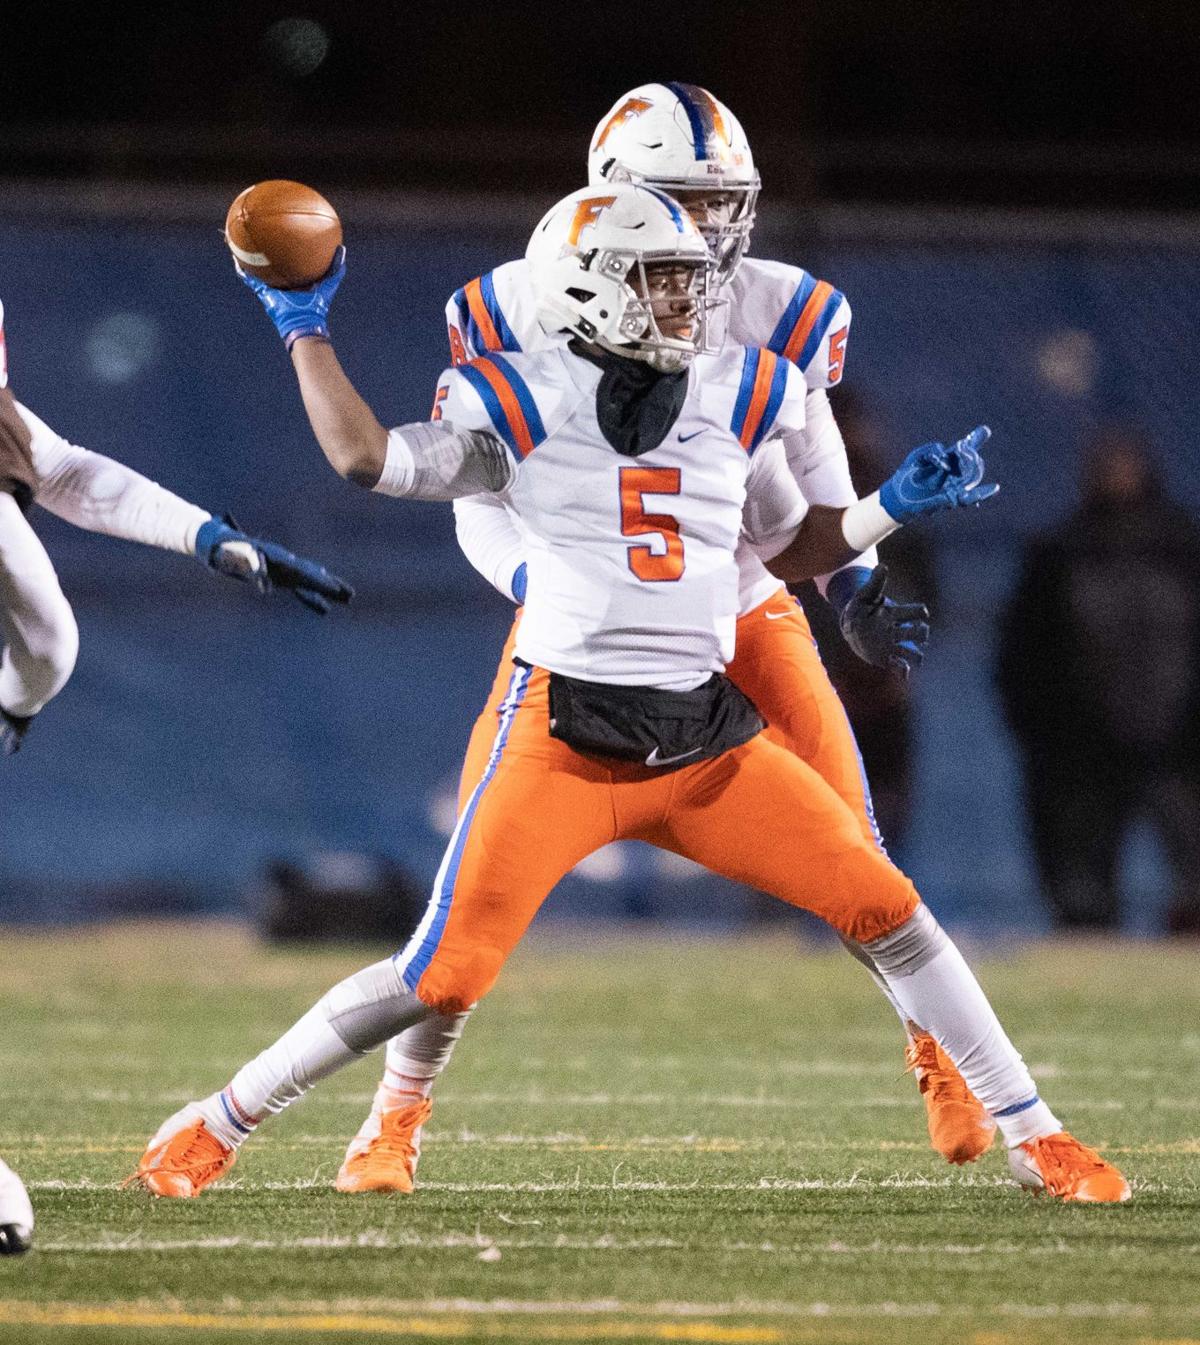 Early miscues hamper East St. Louis in quarterfinal loss to Mount Carmel | High School Football ...